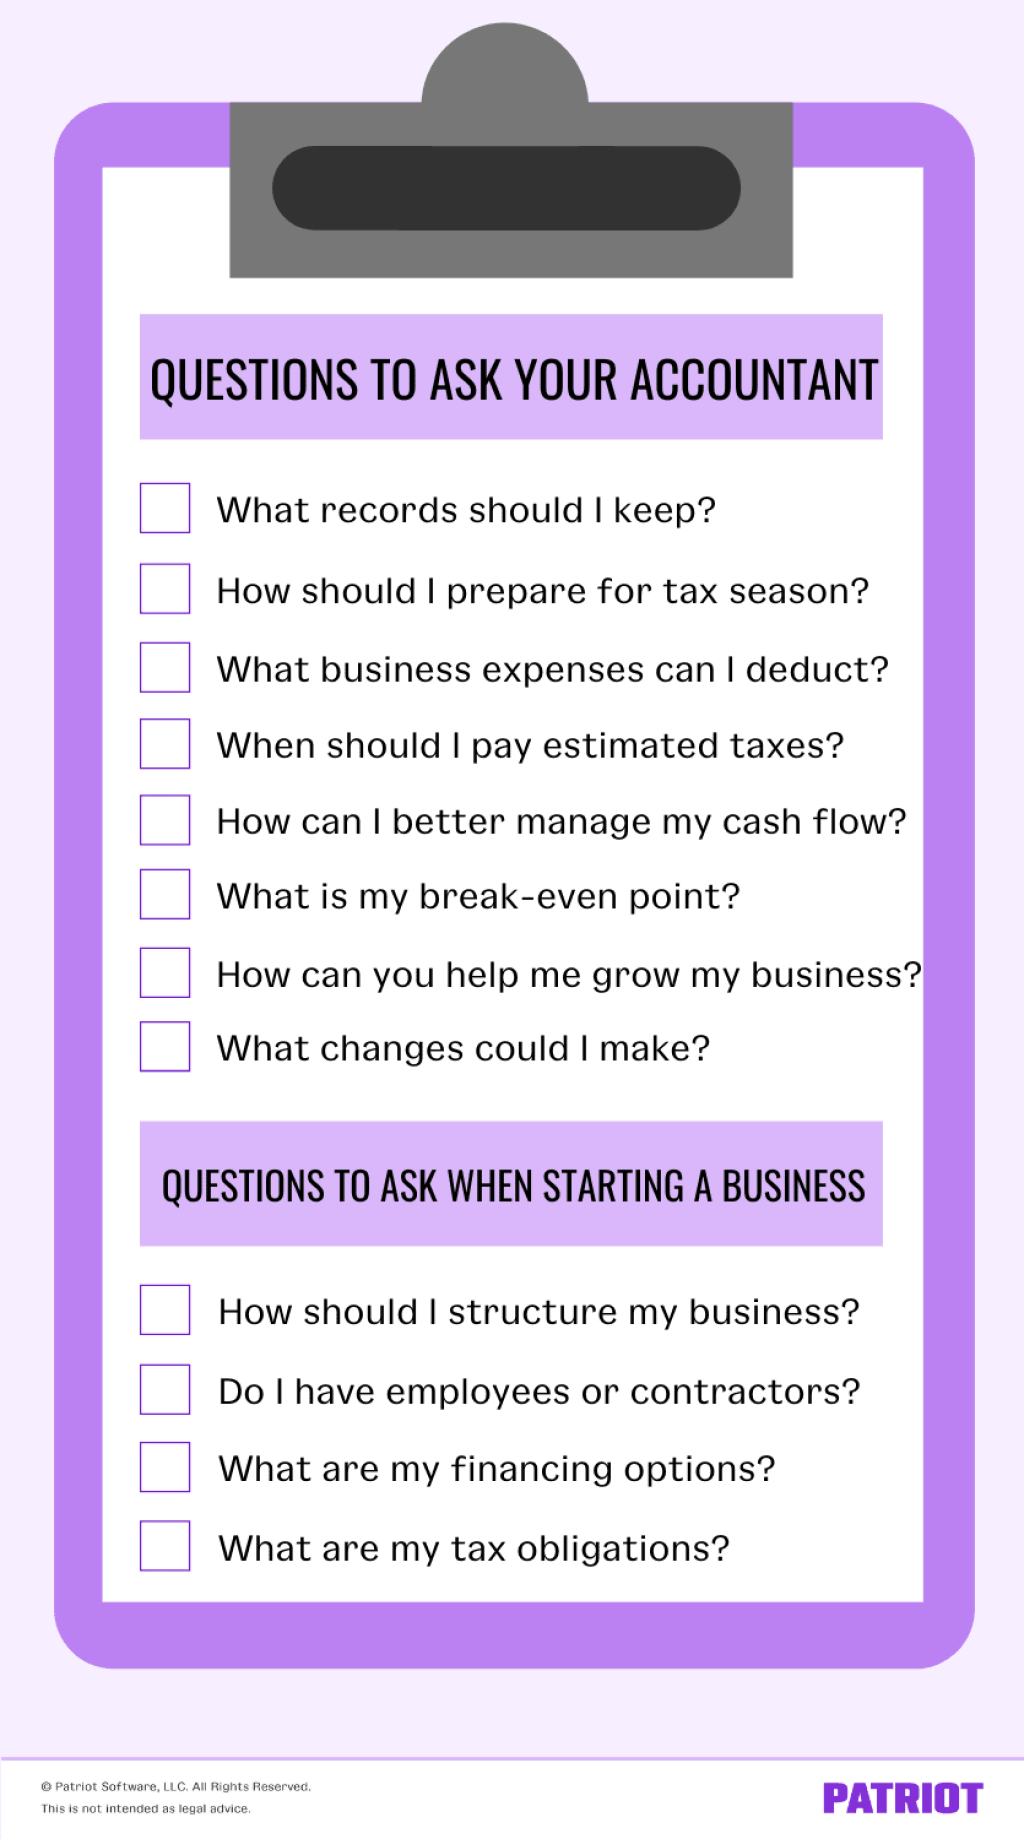 Picture of: Questions to Ask an Account   Basic Questions to Get Started